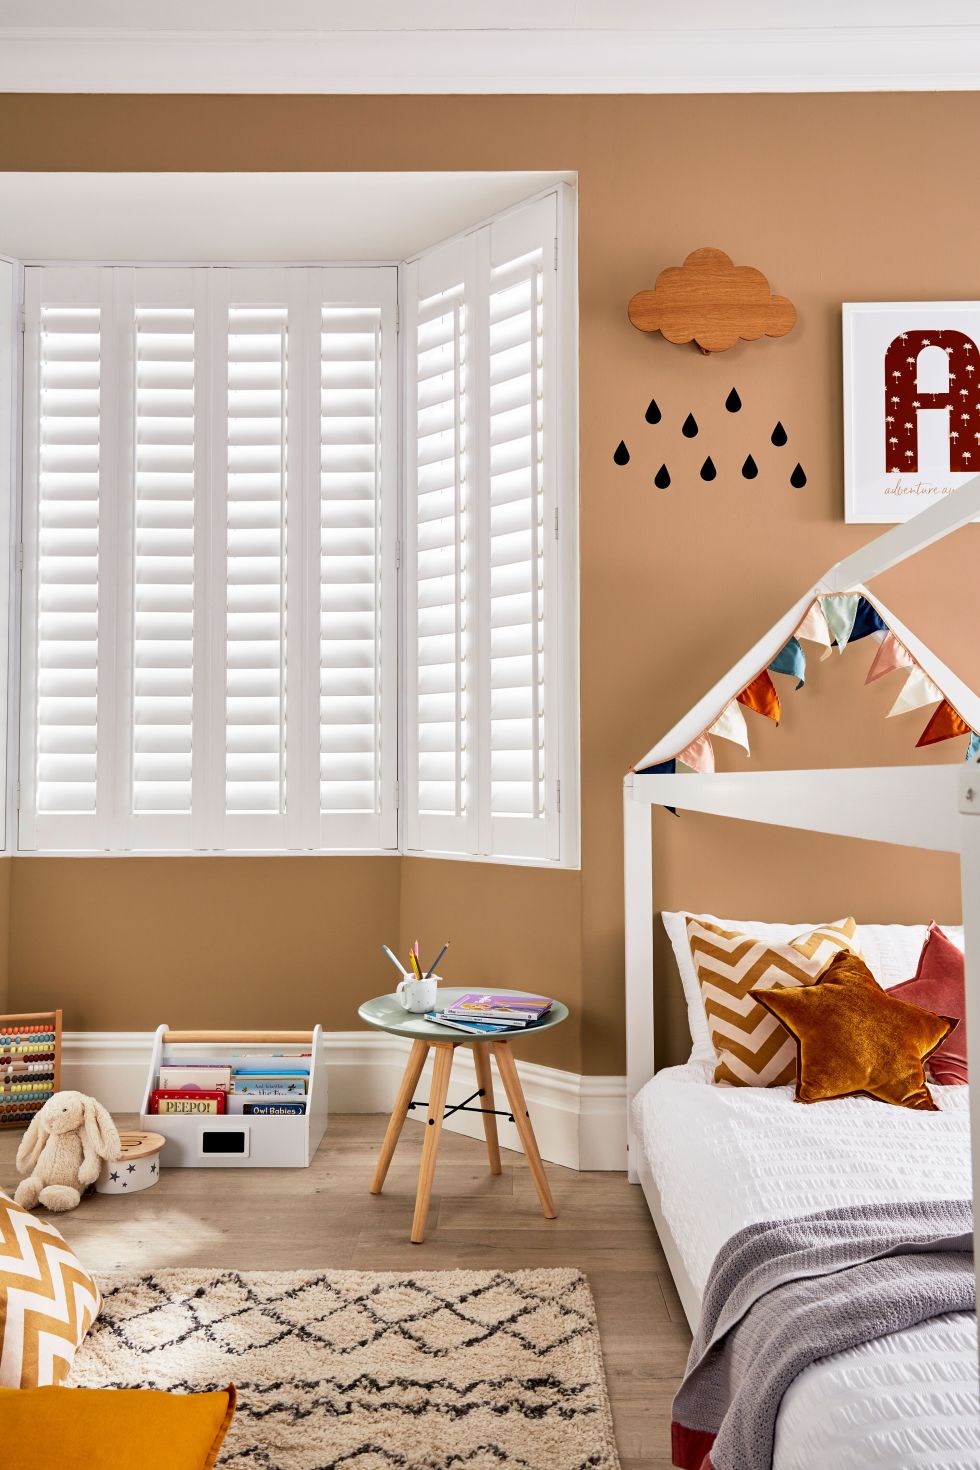 020 LL 2019 Shutters Cotton 89mm Moda Multi L Frame Full Height Bay Bed Closed Crop Orange MAIL